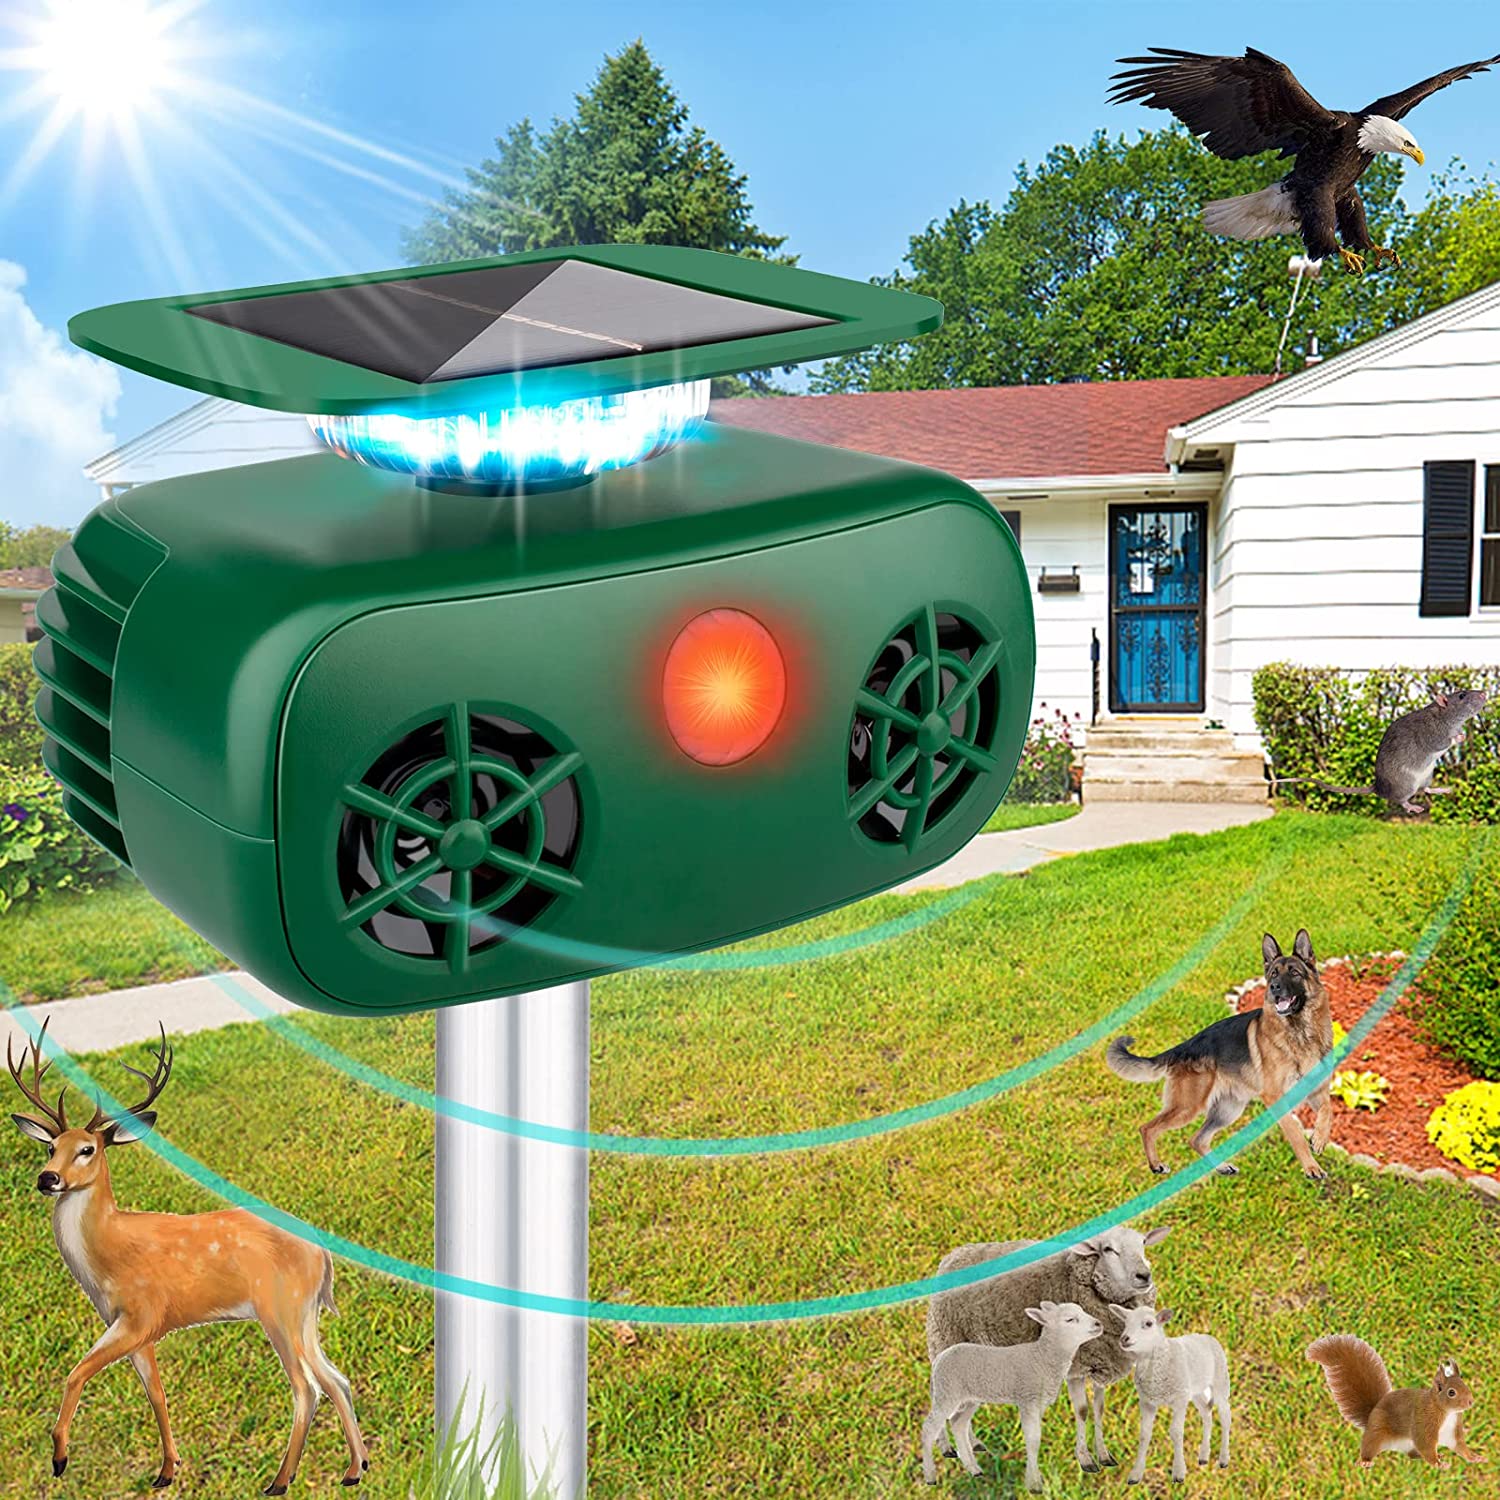 Review of Protecker Ultrasonic Solar Animal Repellent